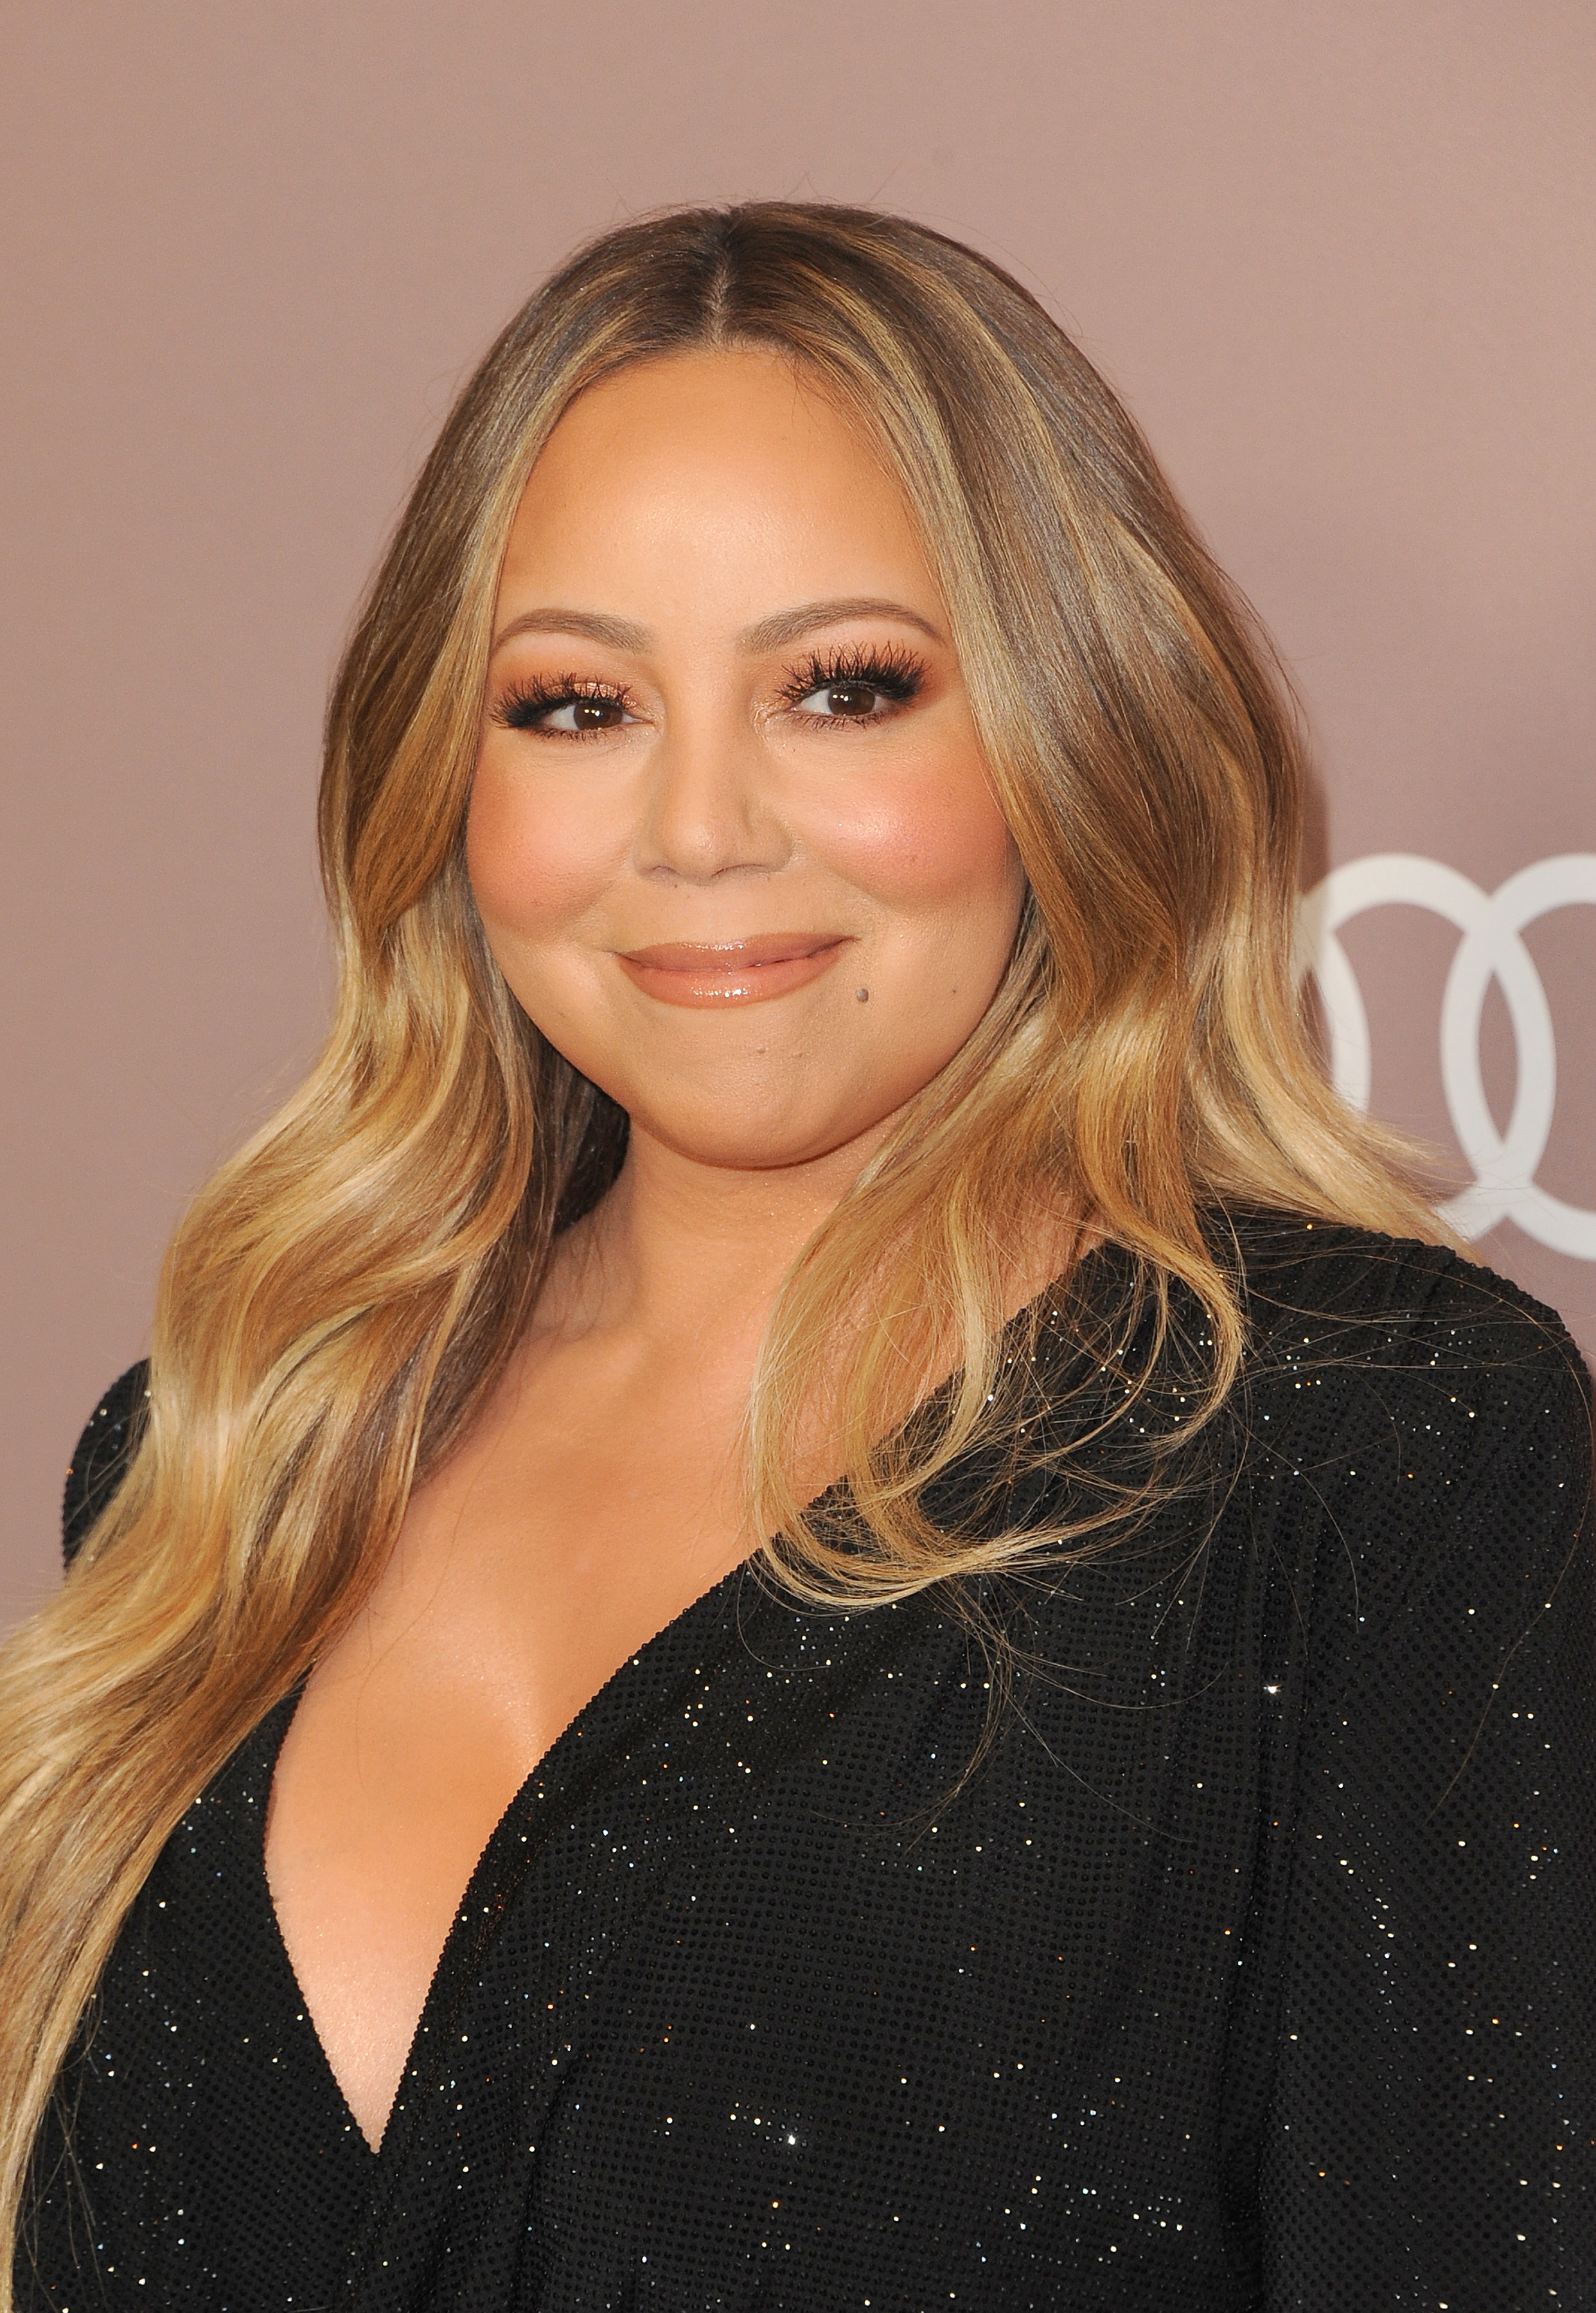 Mariah Carey at the Variety&apos;s 2019 Power Of Women held at the Beverly Wilshire Four Seasons Hotel in Beverly Hills, USA on October 11, 2019.